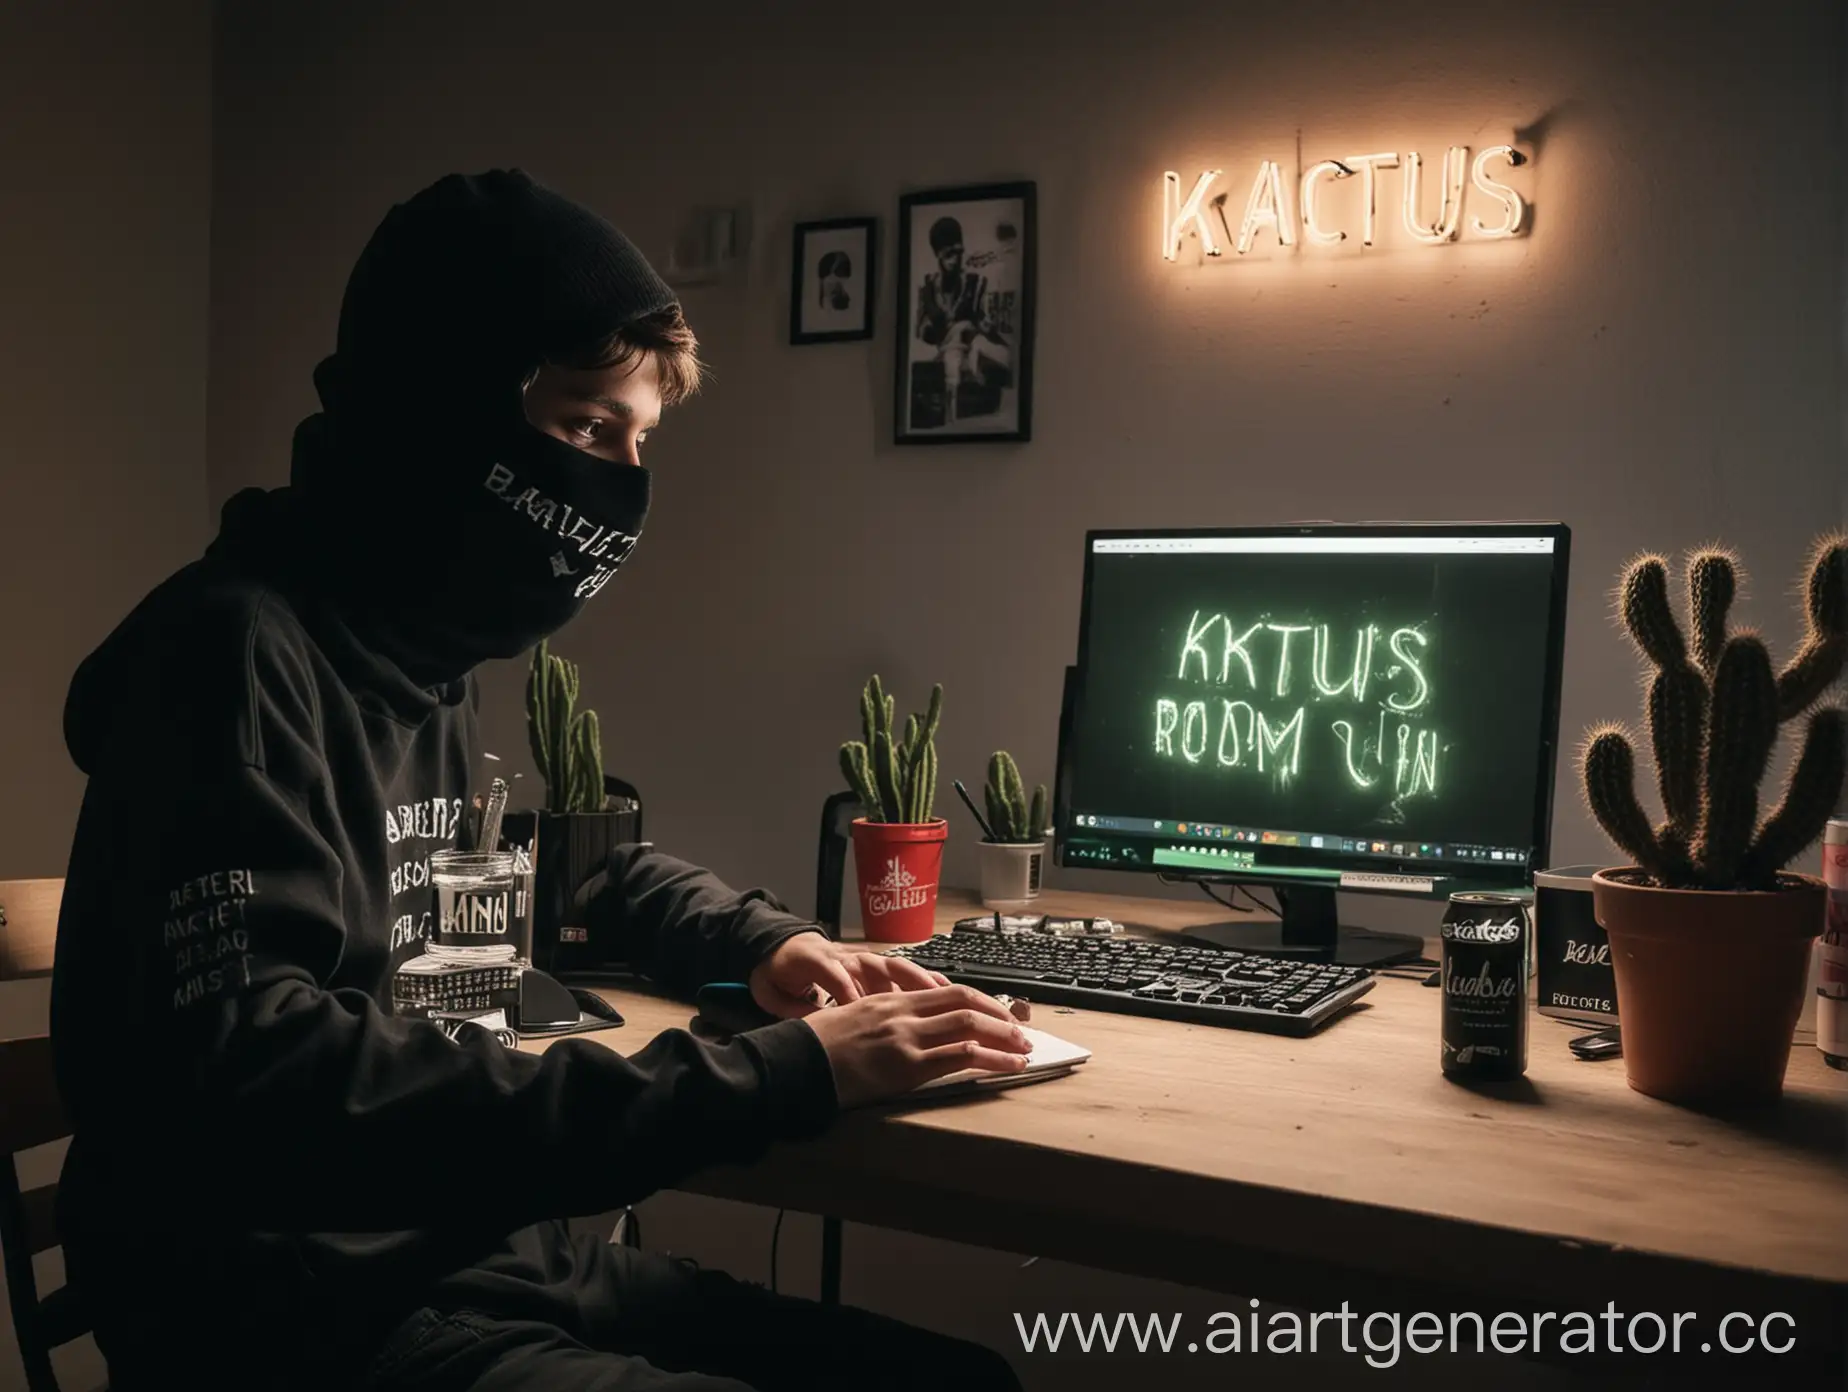 Teen-with-Balaclava-and-Cigarette-at-Computer-Desk-with-Neon-Room-Glow